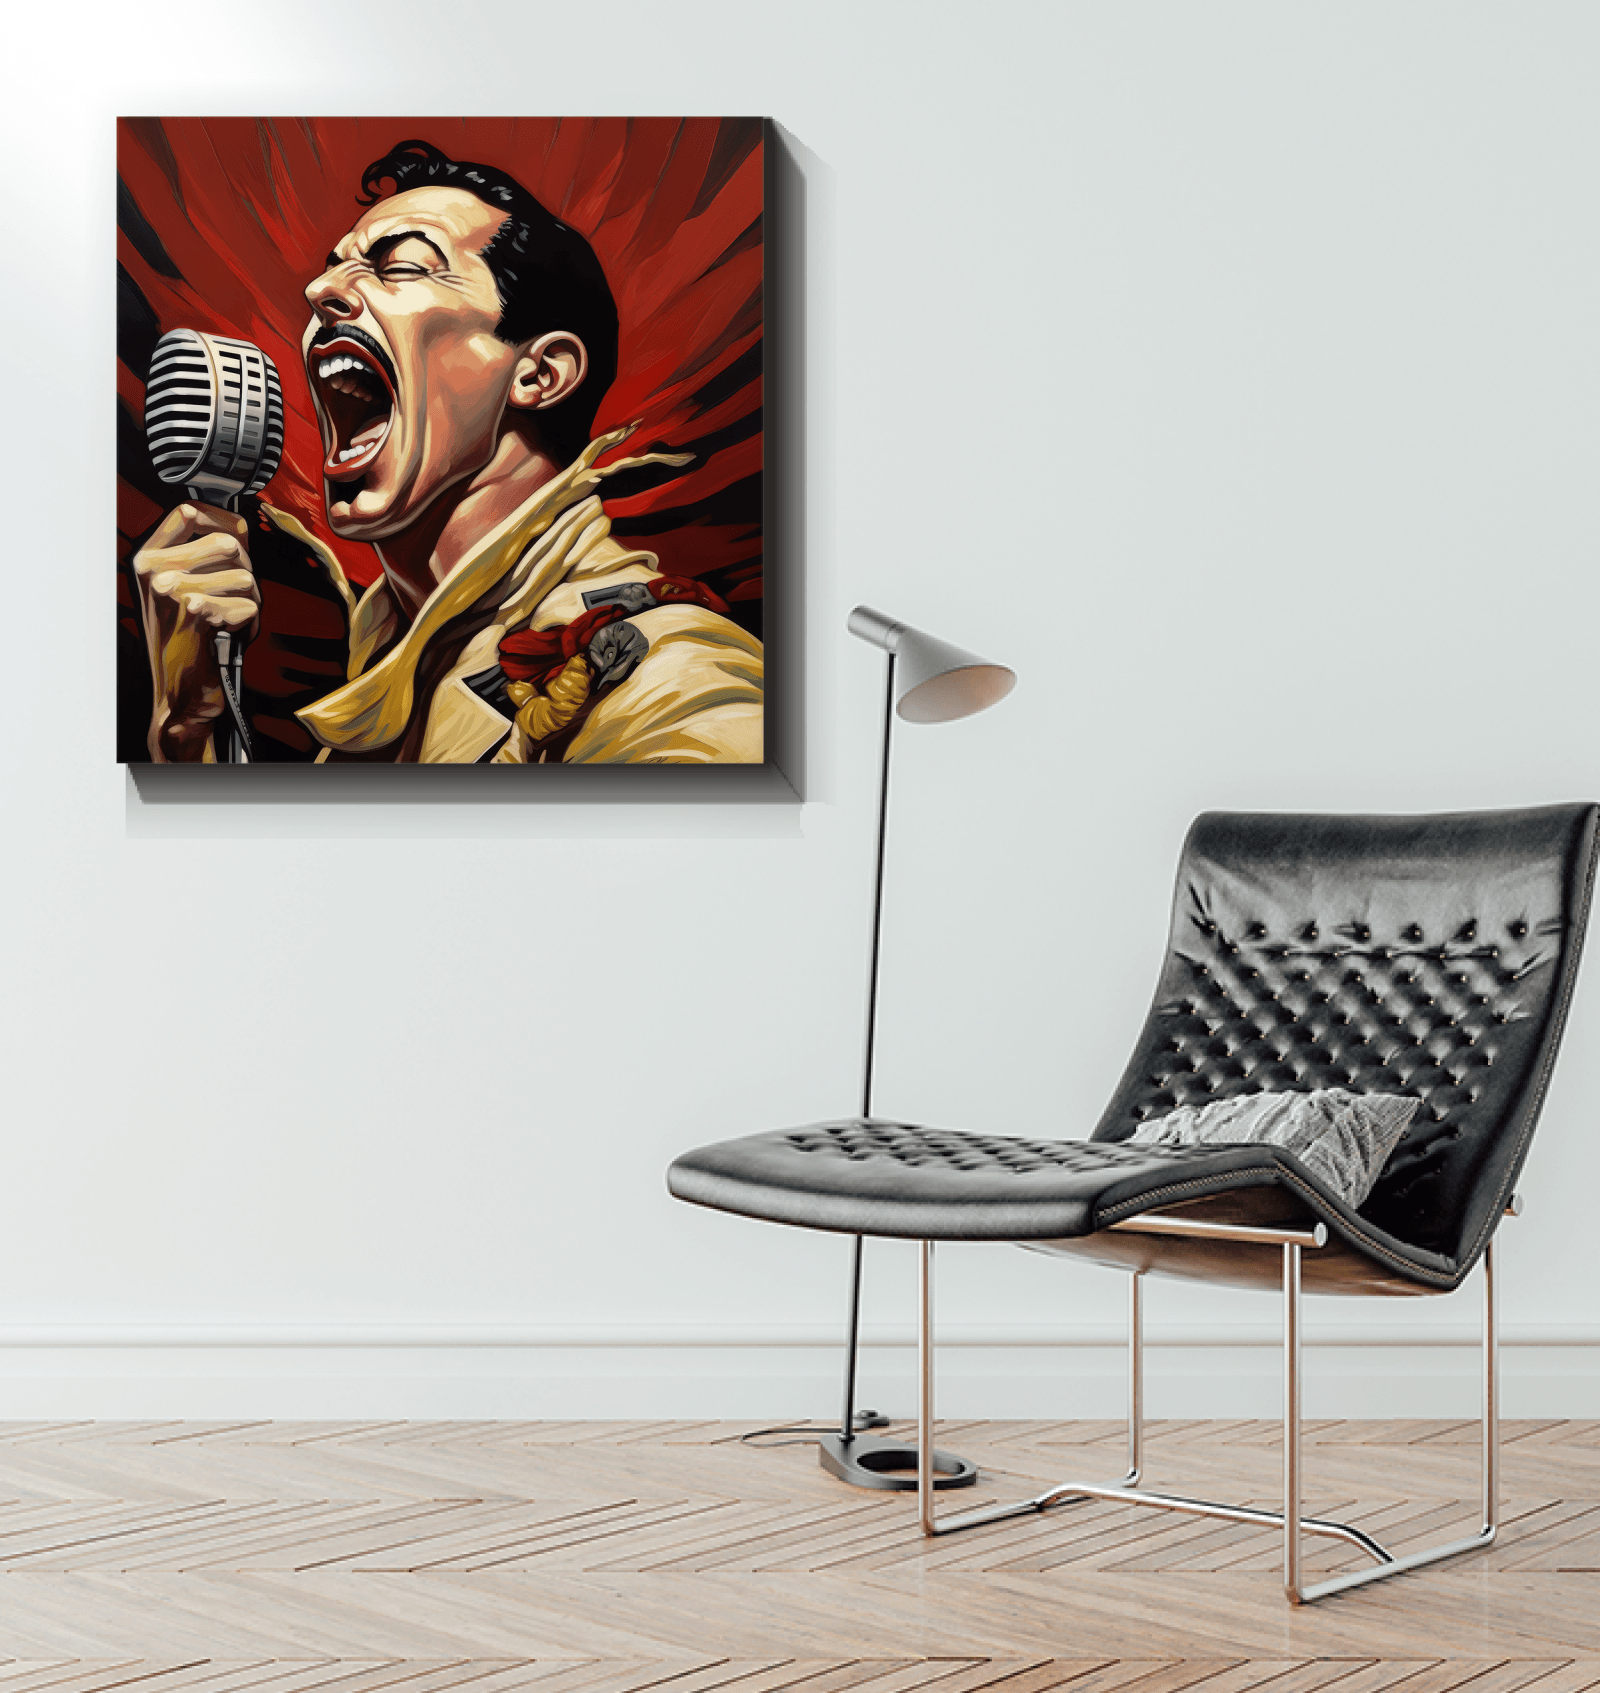 Culture-shaping musicians art piece designed for modern home interiors.